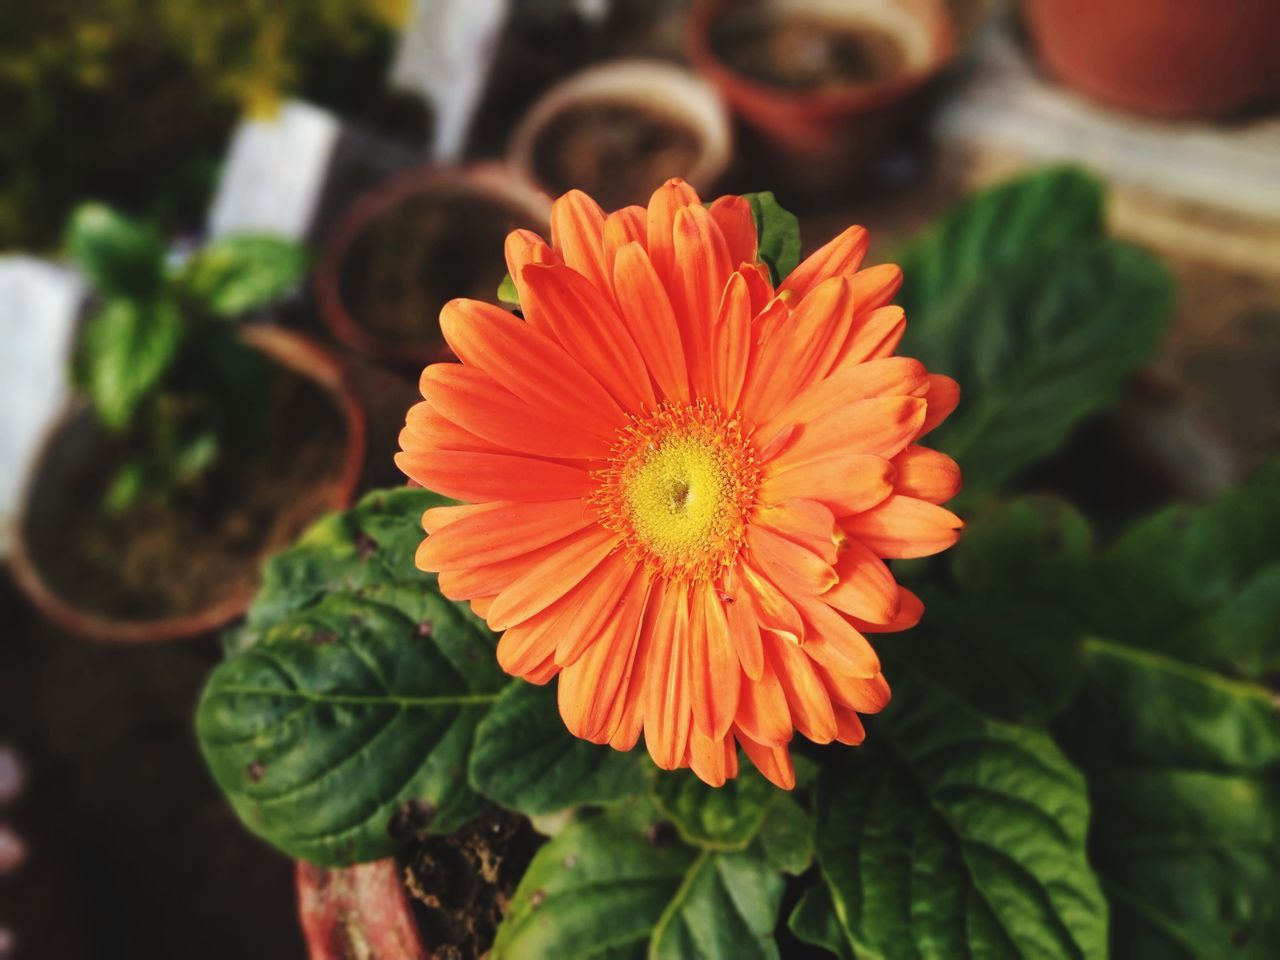 flower, flowering plant, plant, freshness, beauty in nature, flower head, close-up, nature, petal, growth, inflorescence, fragility, plant part, leaf, orange color, yellow, focus on foreground, floristry, no people, macro photography, outdoors, multi colored, day, calendula, green, botany